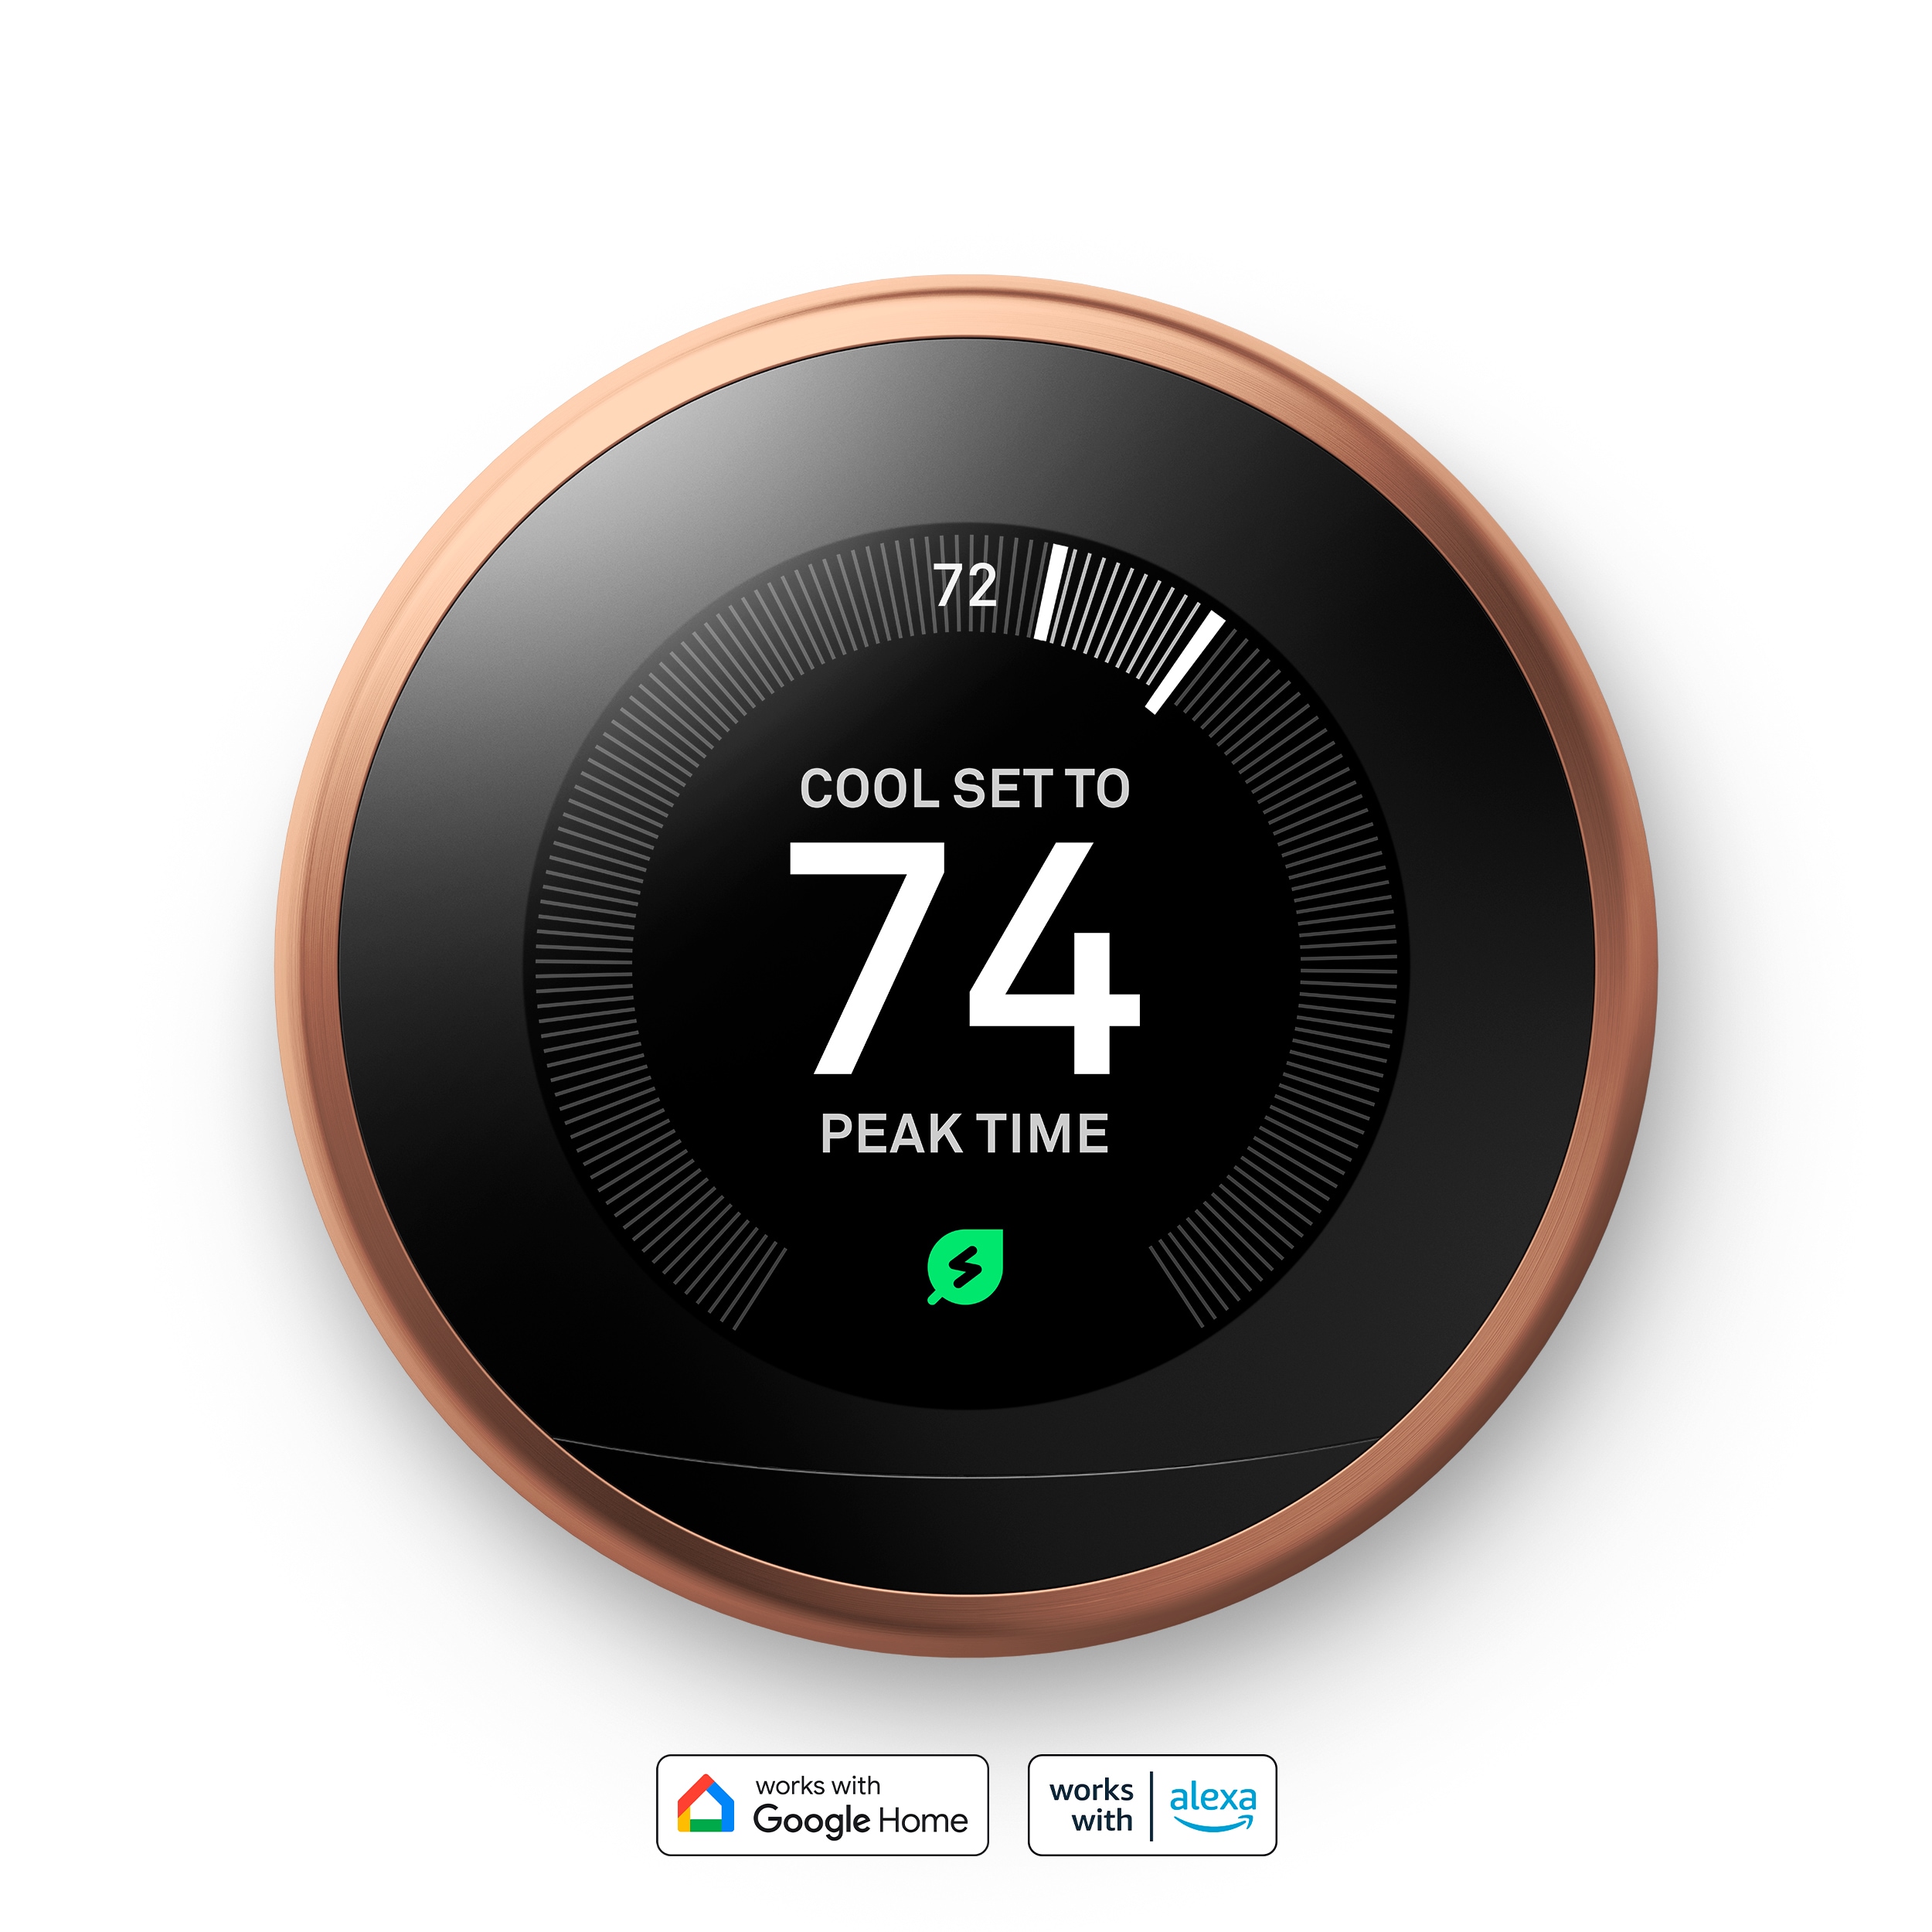 Nest Learning Thermostat knows when you are away from home and